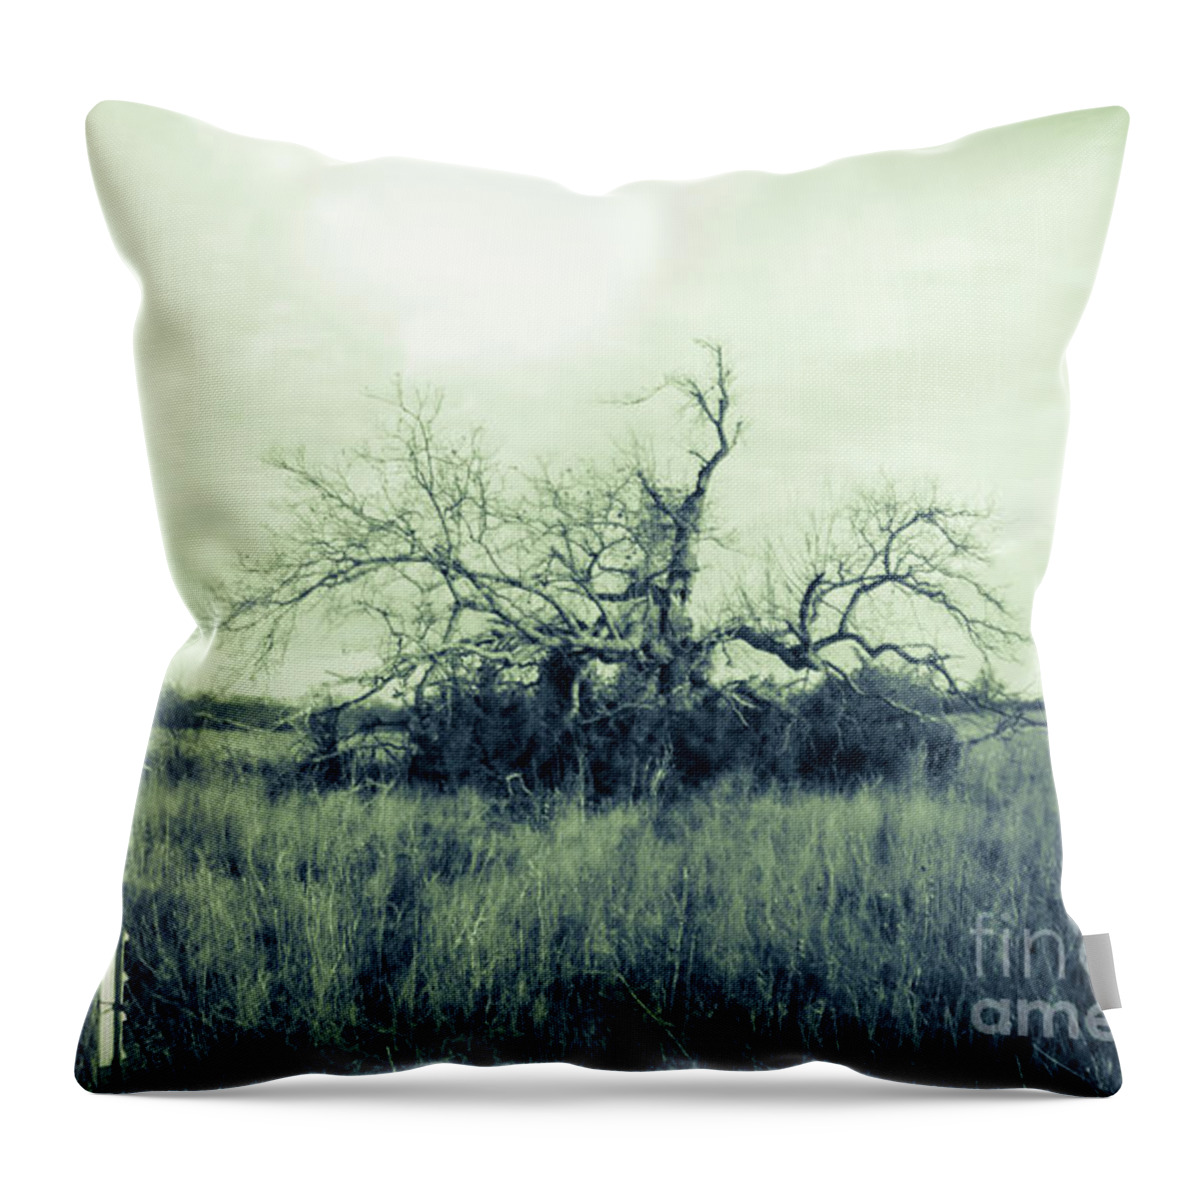 Pecan Throw Pillow featuring the photograph Winter Pecan by Cheryl McClure